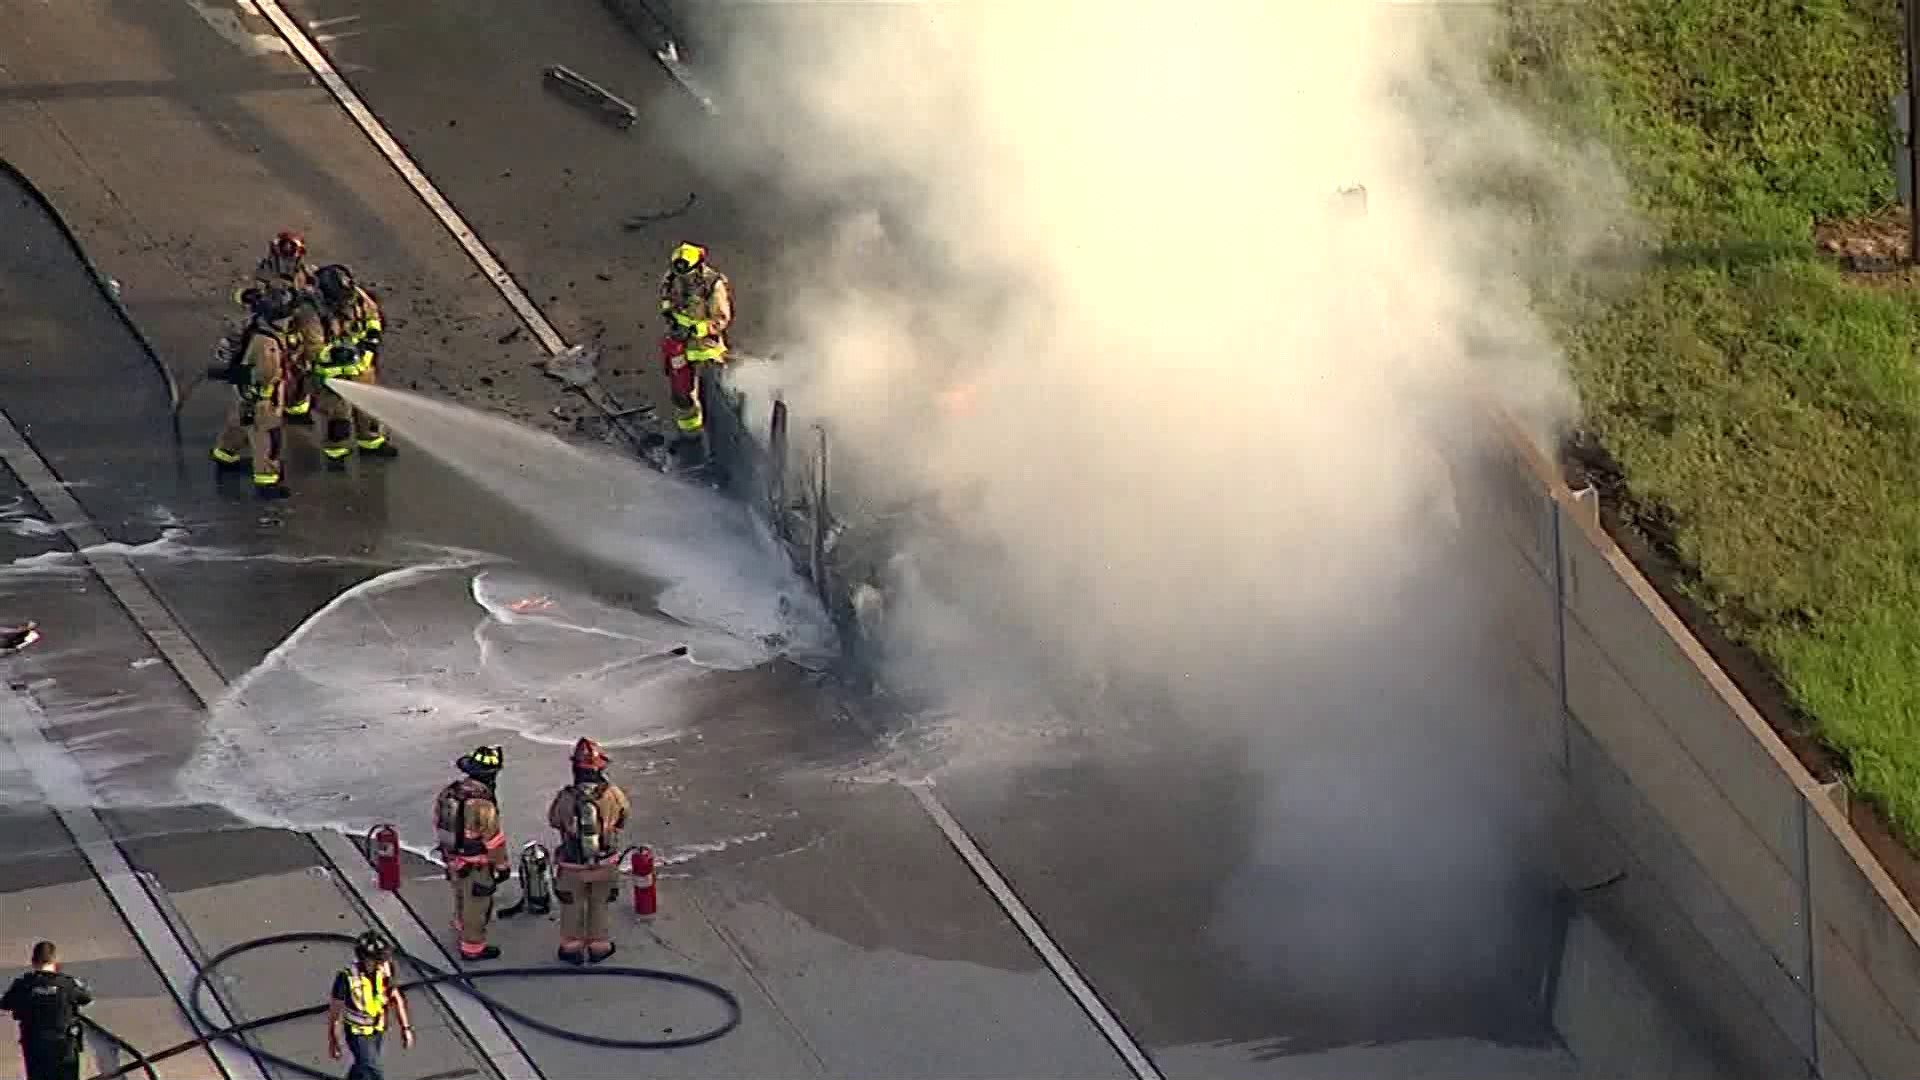 Video showed firefighters trying to put out the flames as oily runoff kept re-igniting.